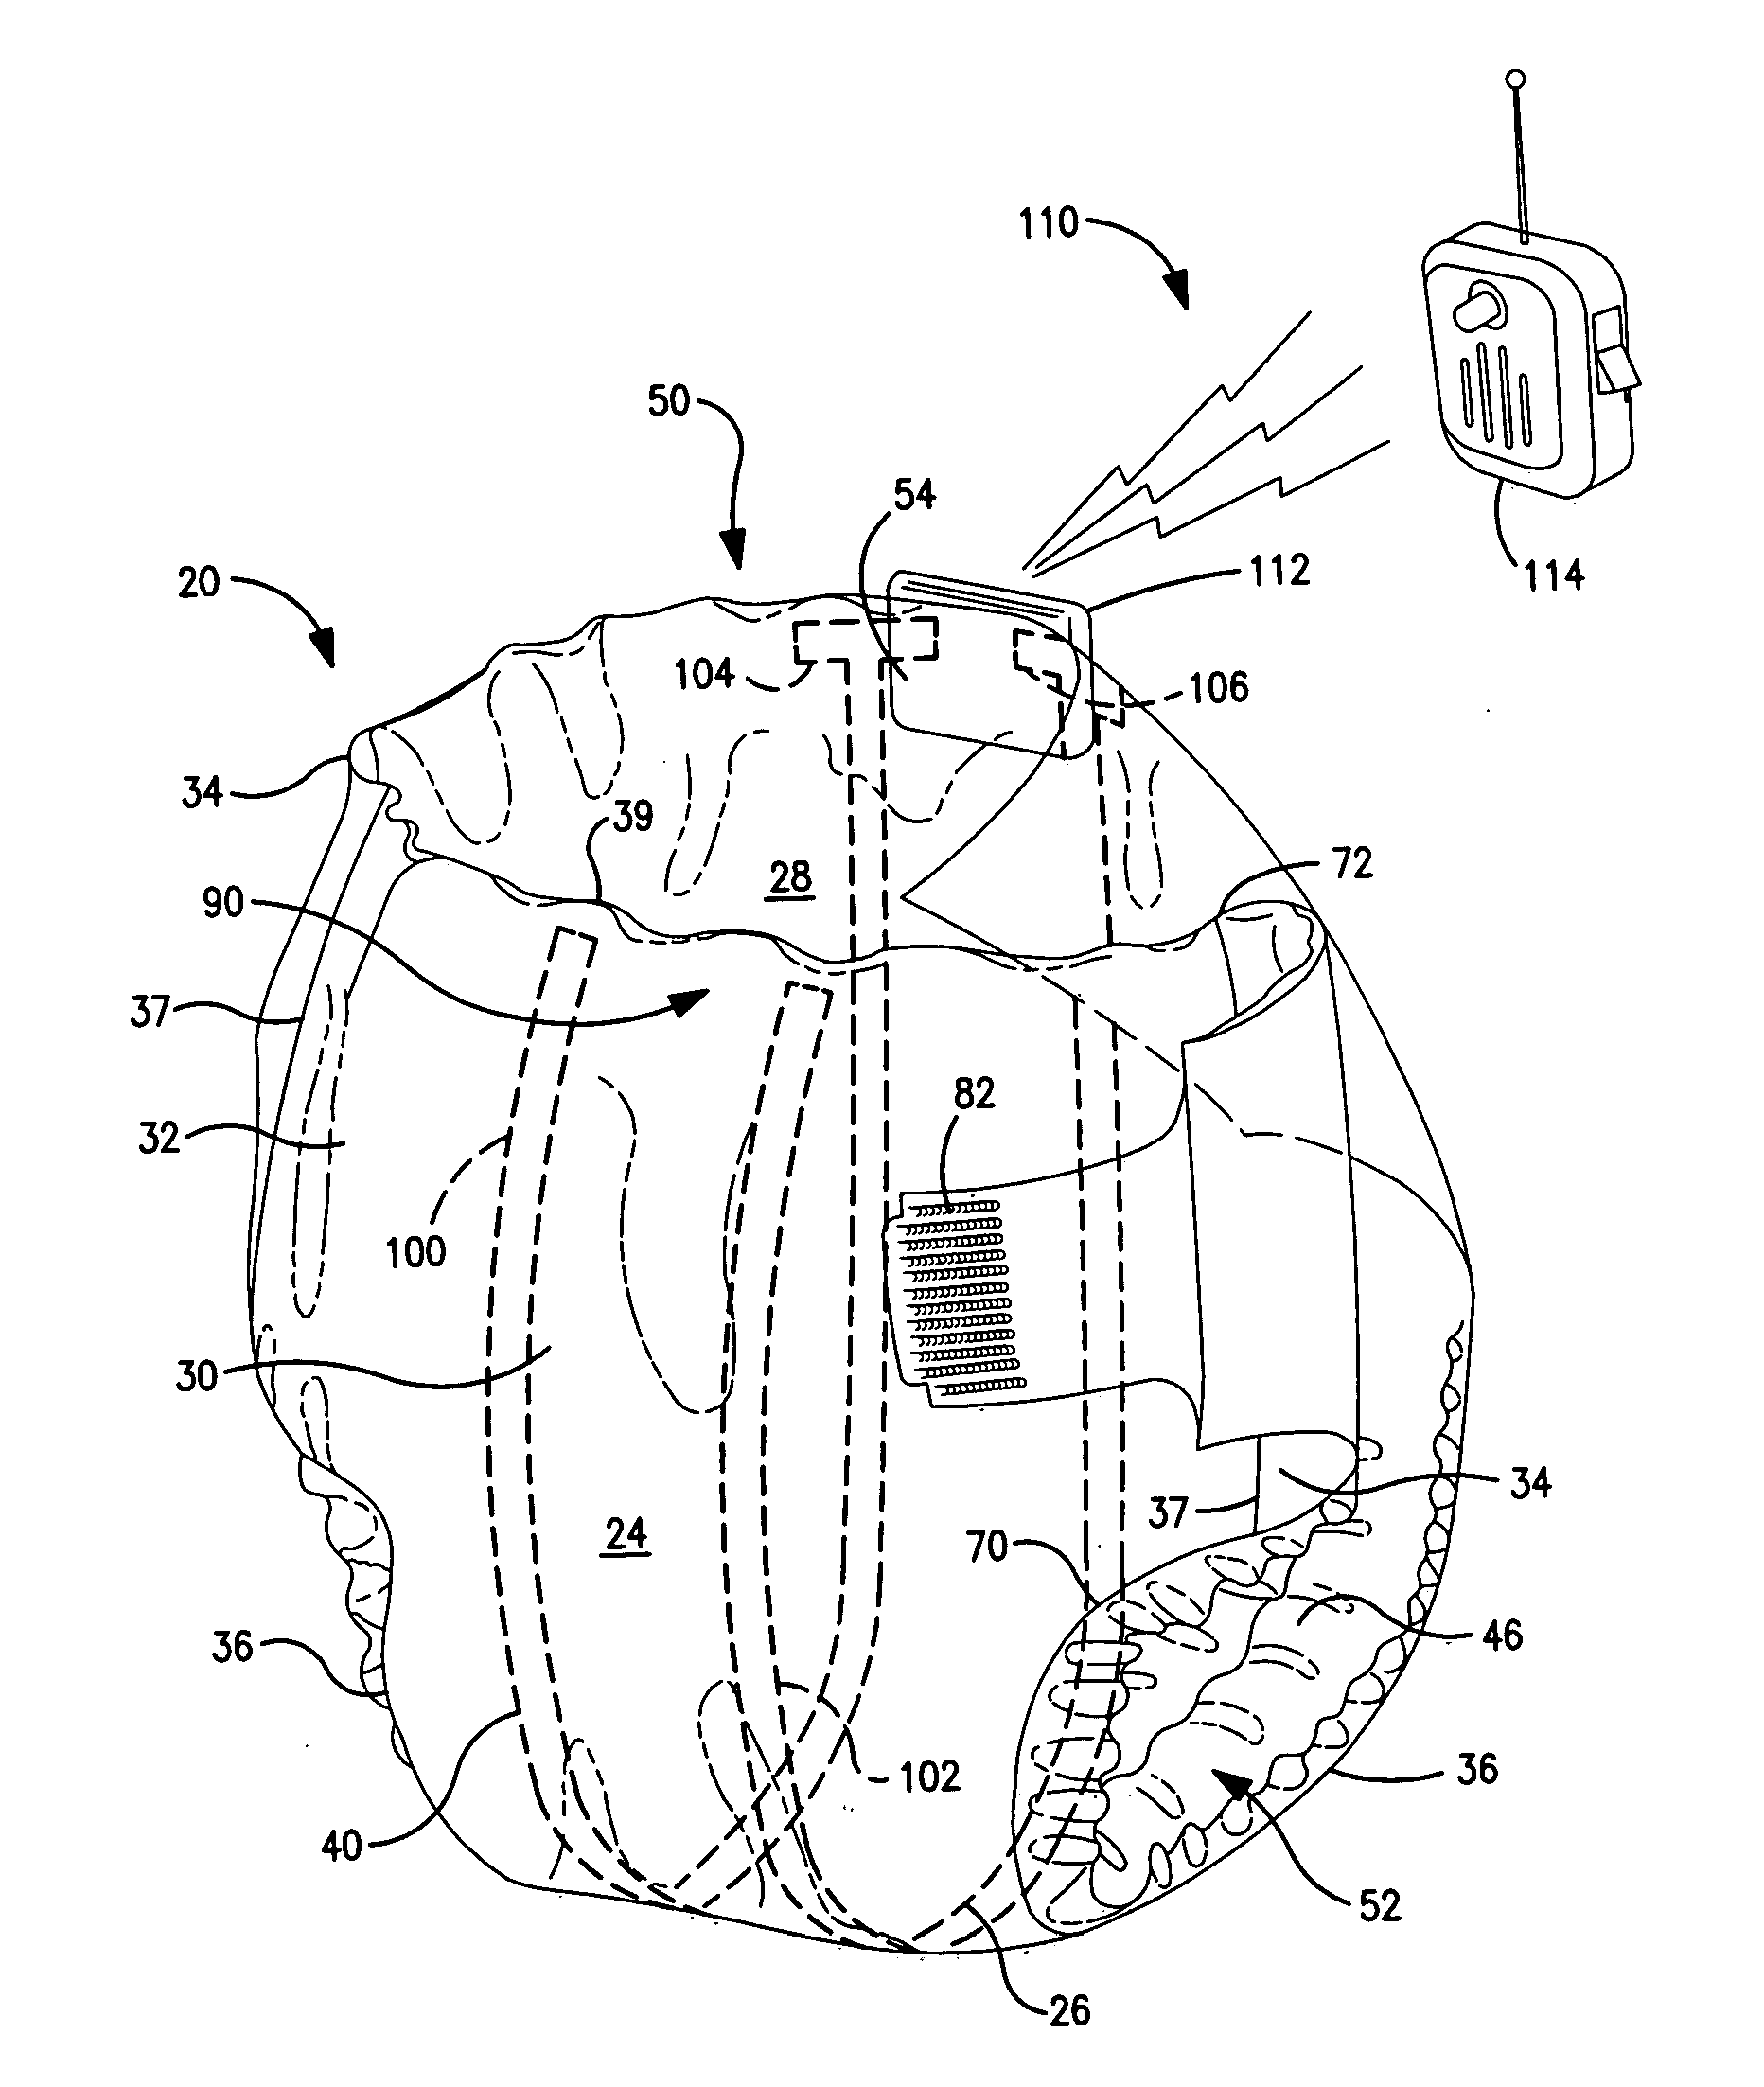 Connection mechanisms in absorbent articles for body fluid signaling devices